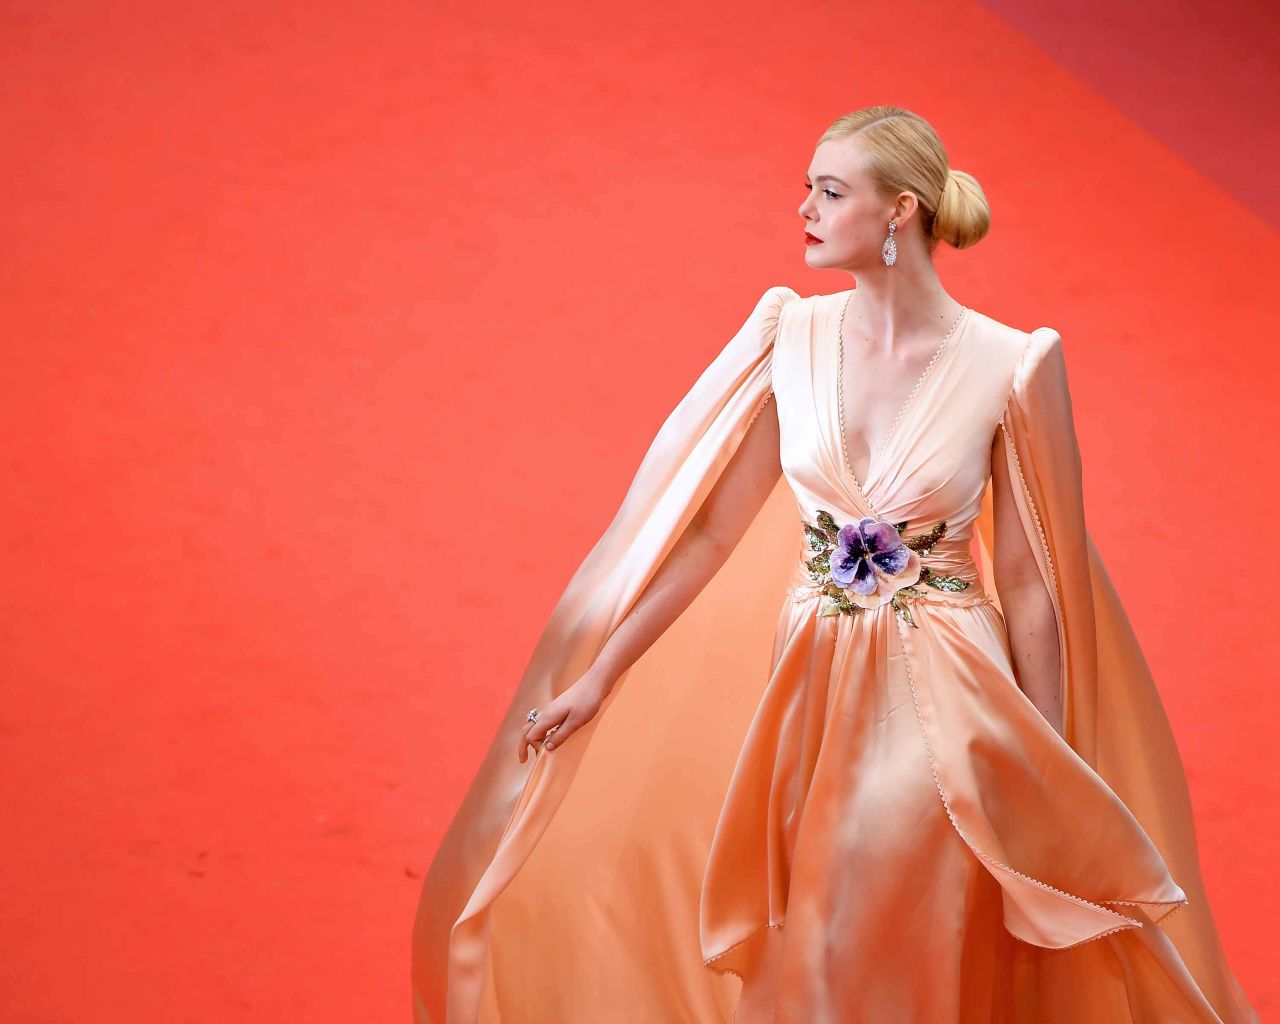 Twenty-one-year-old Elle Fanning -- who is now the youngest ever Cannes jury member -- looks triumphant in Gucci.